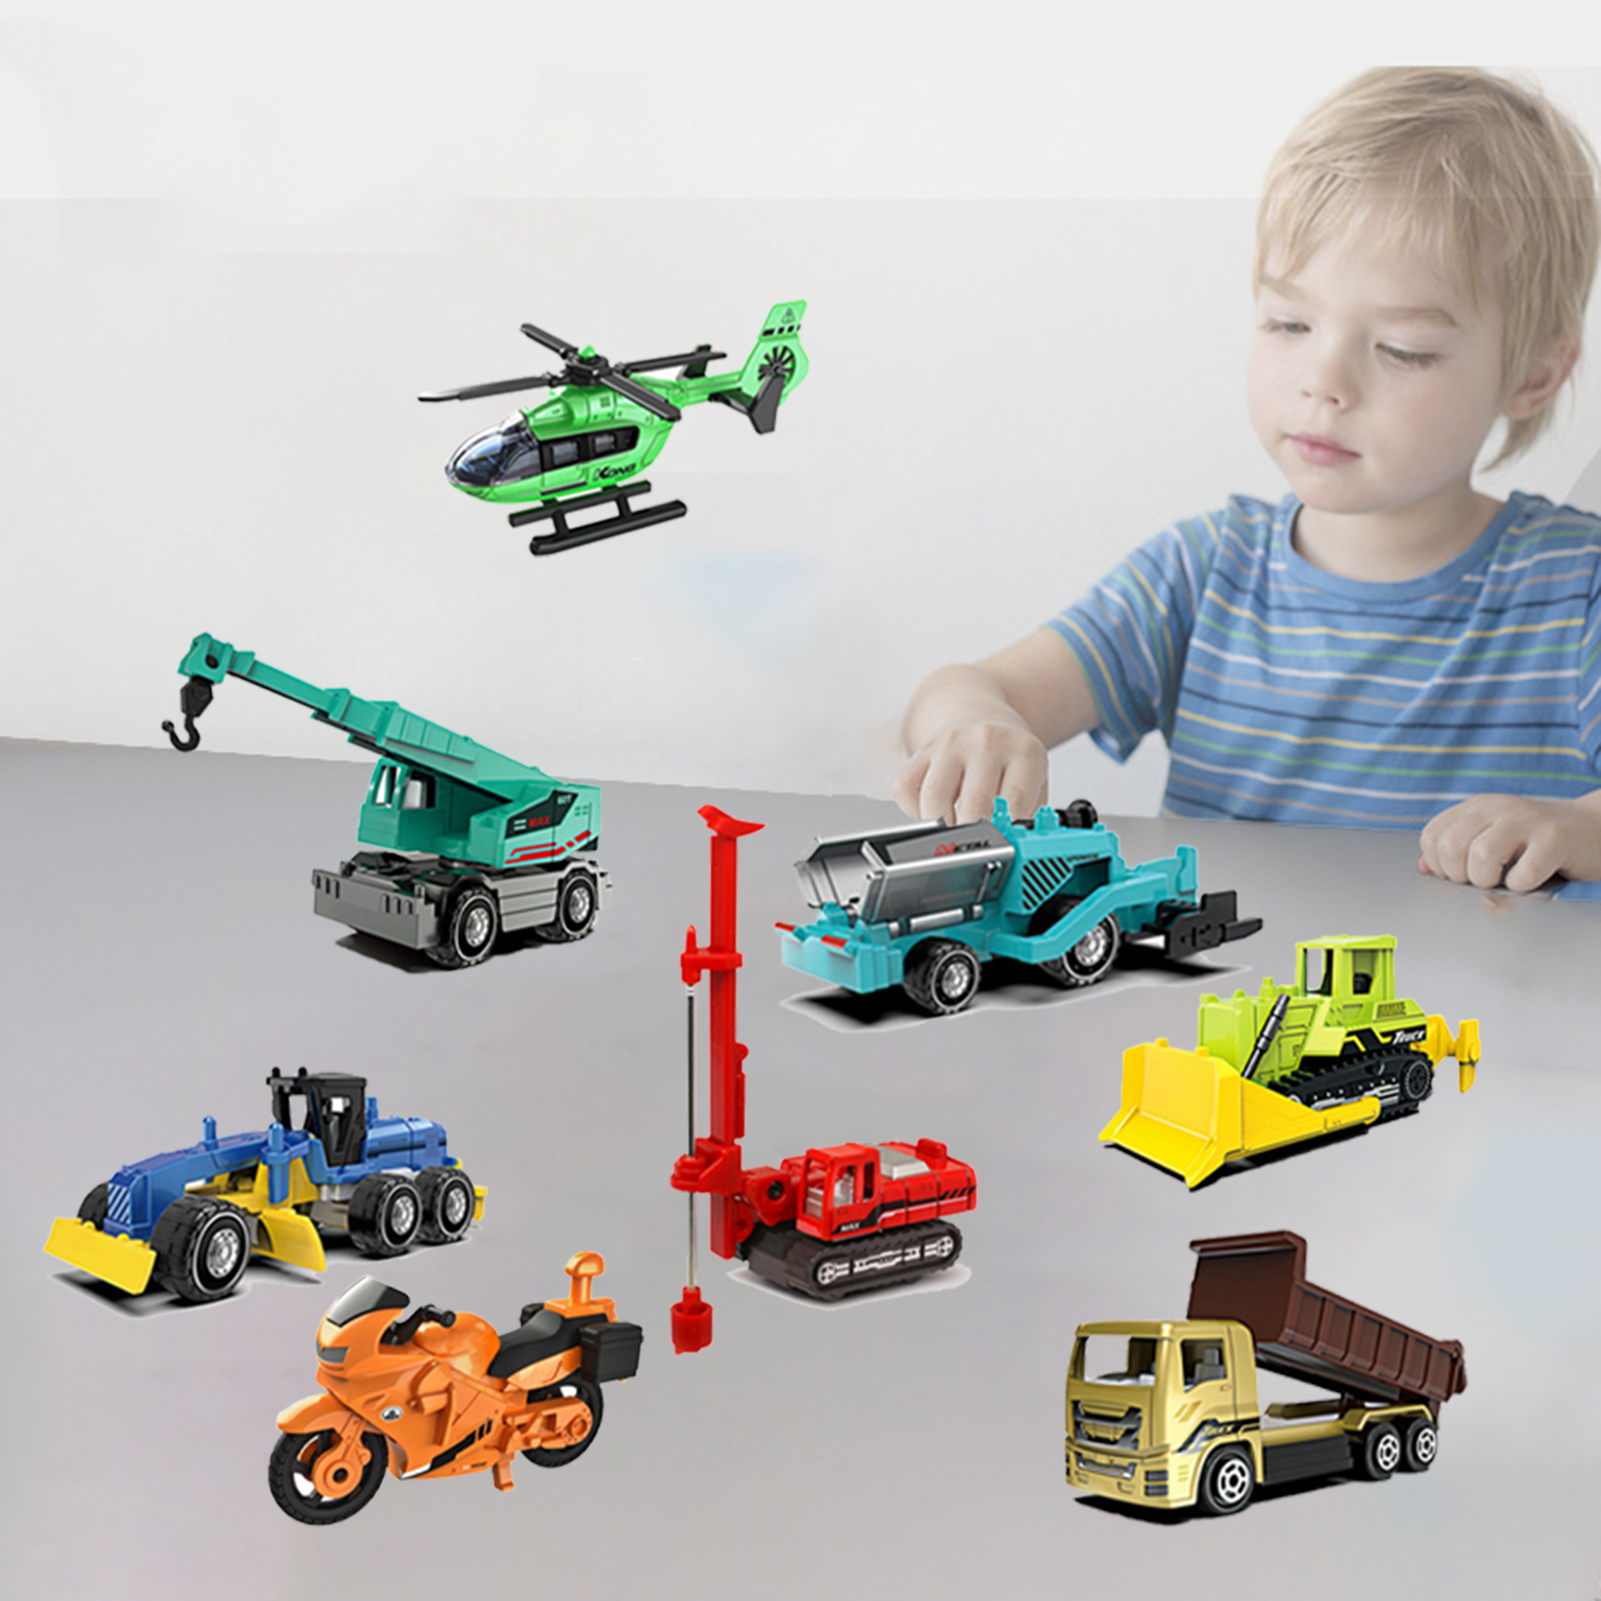 Pnellth 4Pcs/Set Engineering Trunk Toys Simulation Cranes Forklift Cargo Truck Diecast Alloy Vehicle Toy 1:64 Scale Engineering Vehicle Aircraft Motorcycle Models Set Christmas Gift - image 4 of 8